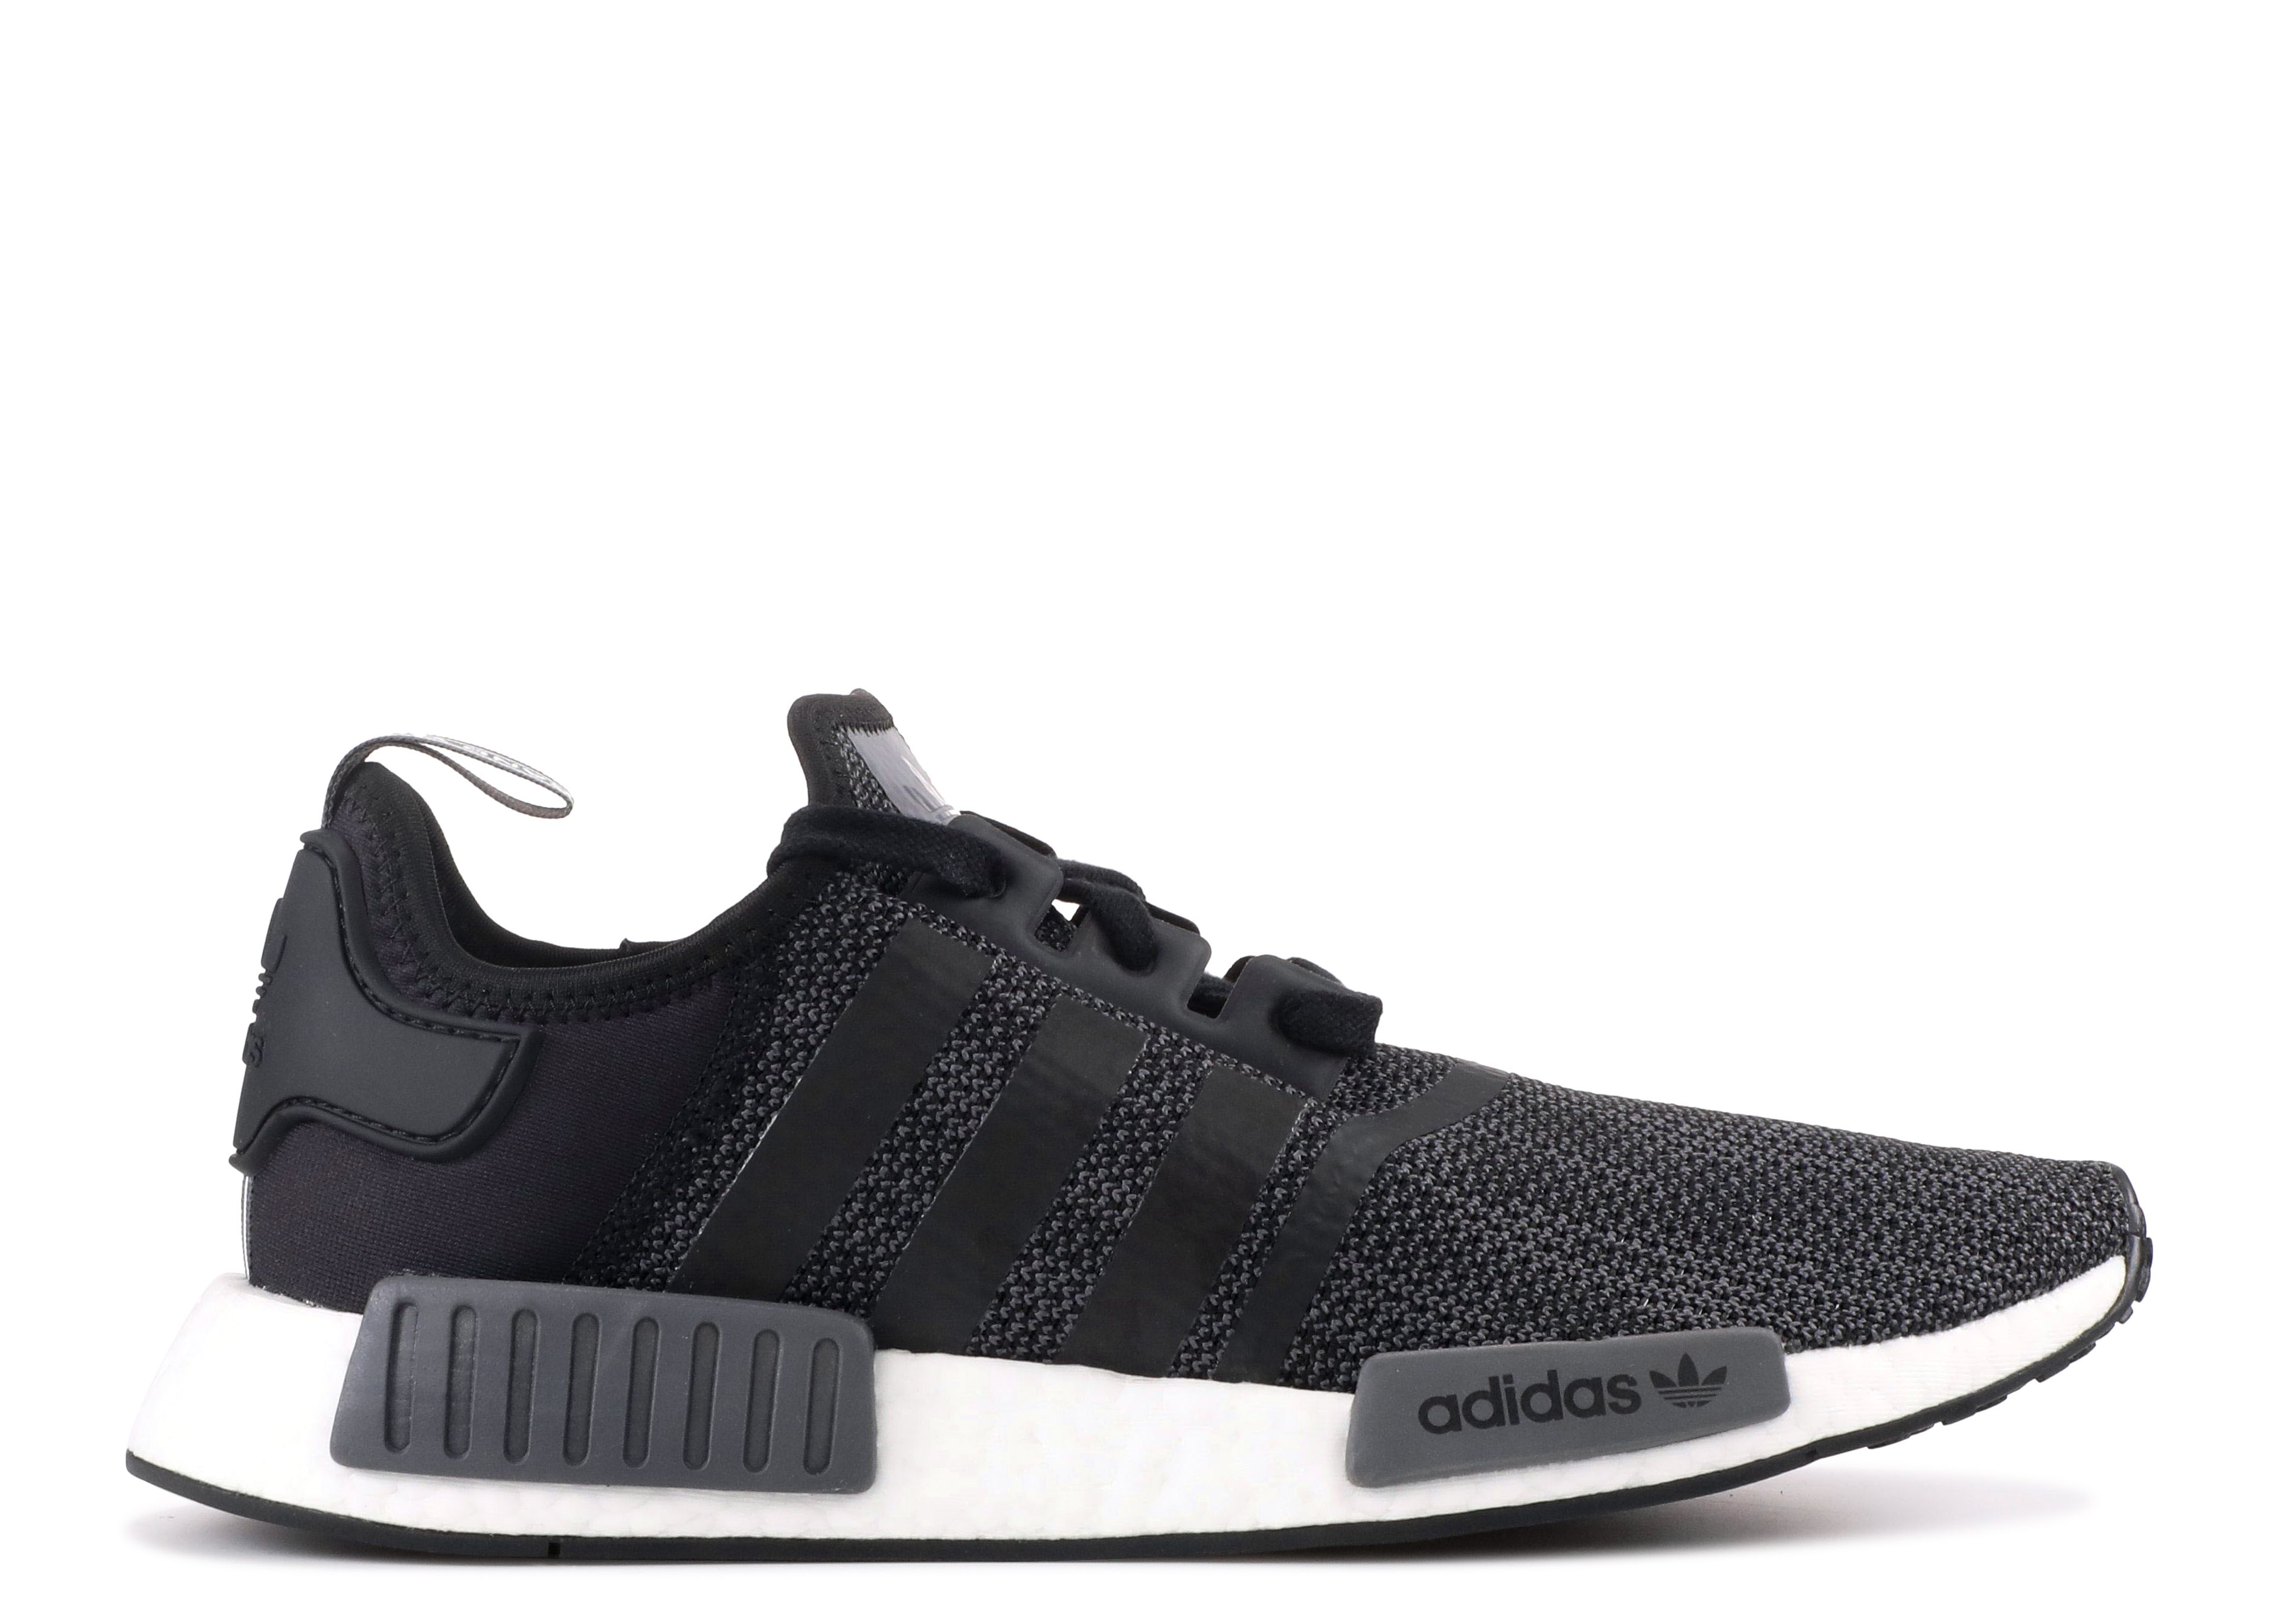 Adidas Nmd Xr1 Duck Camo White Shoes Sale Pinterest